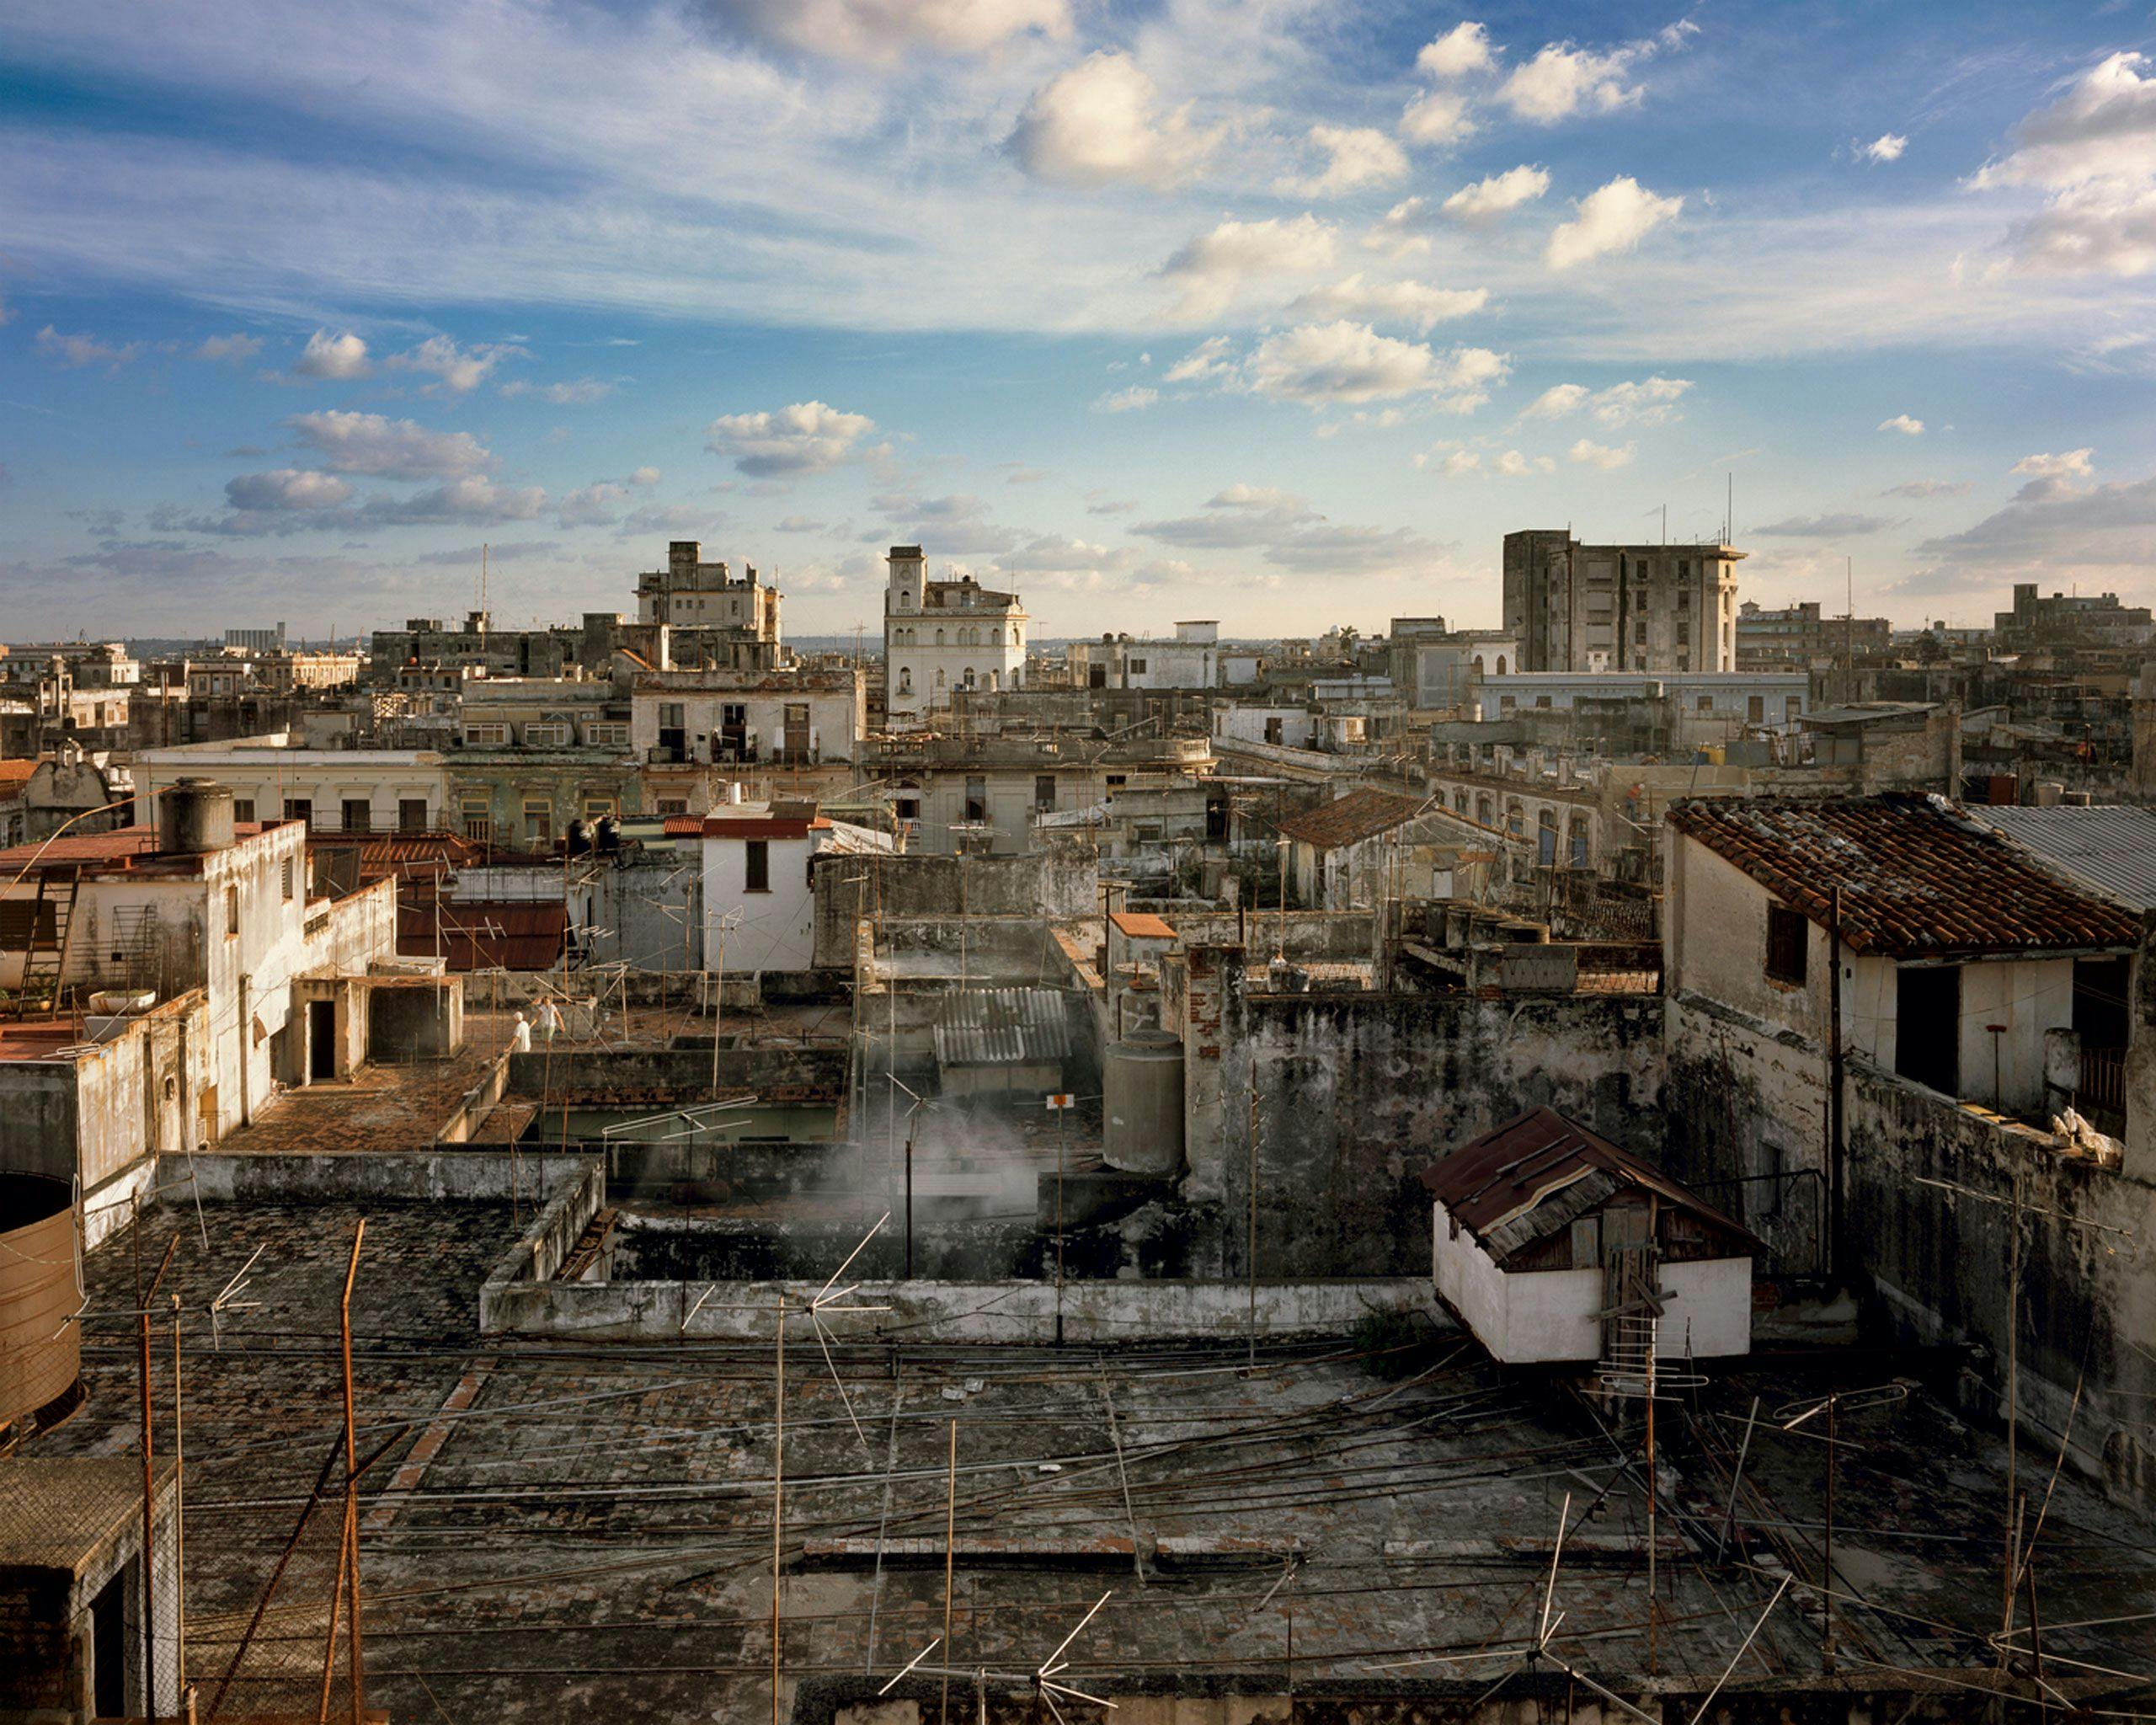 A photograph by Stan Douglas, titled Rooftops, Habana Vieja, dated 2004.